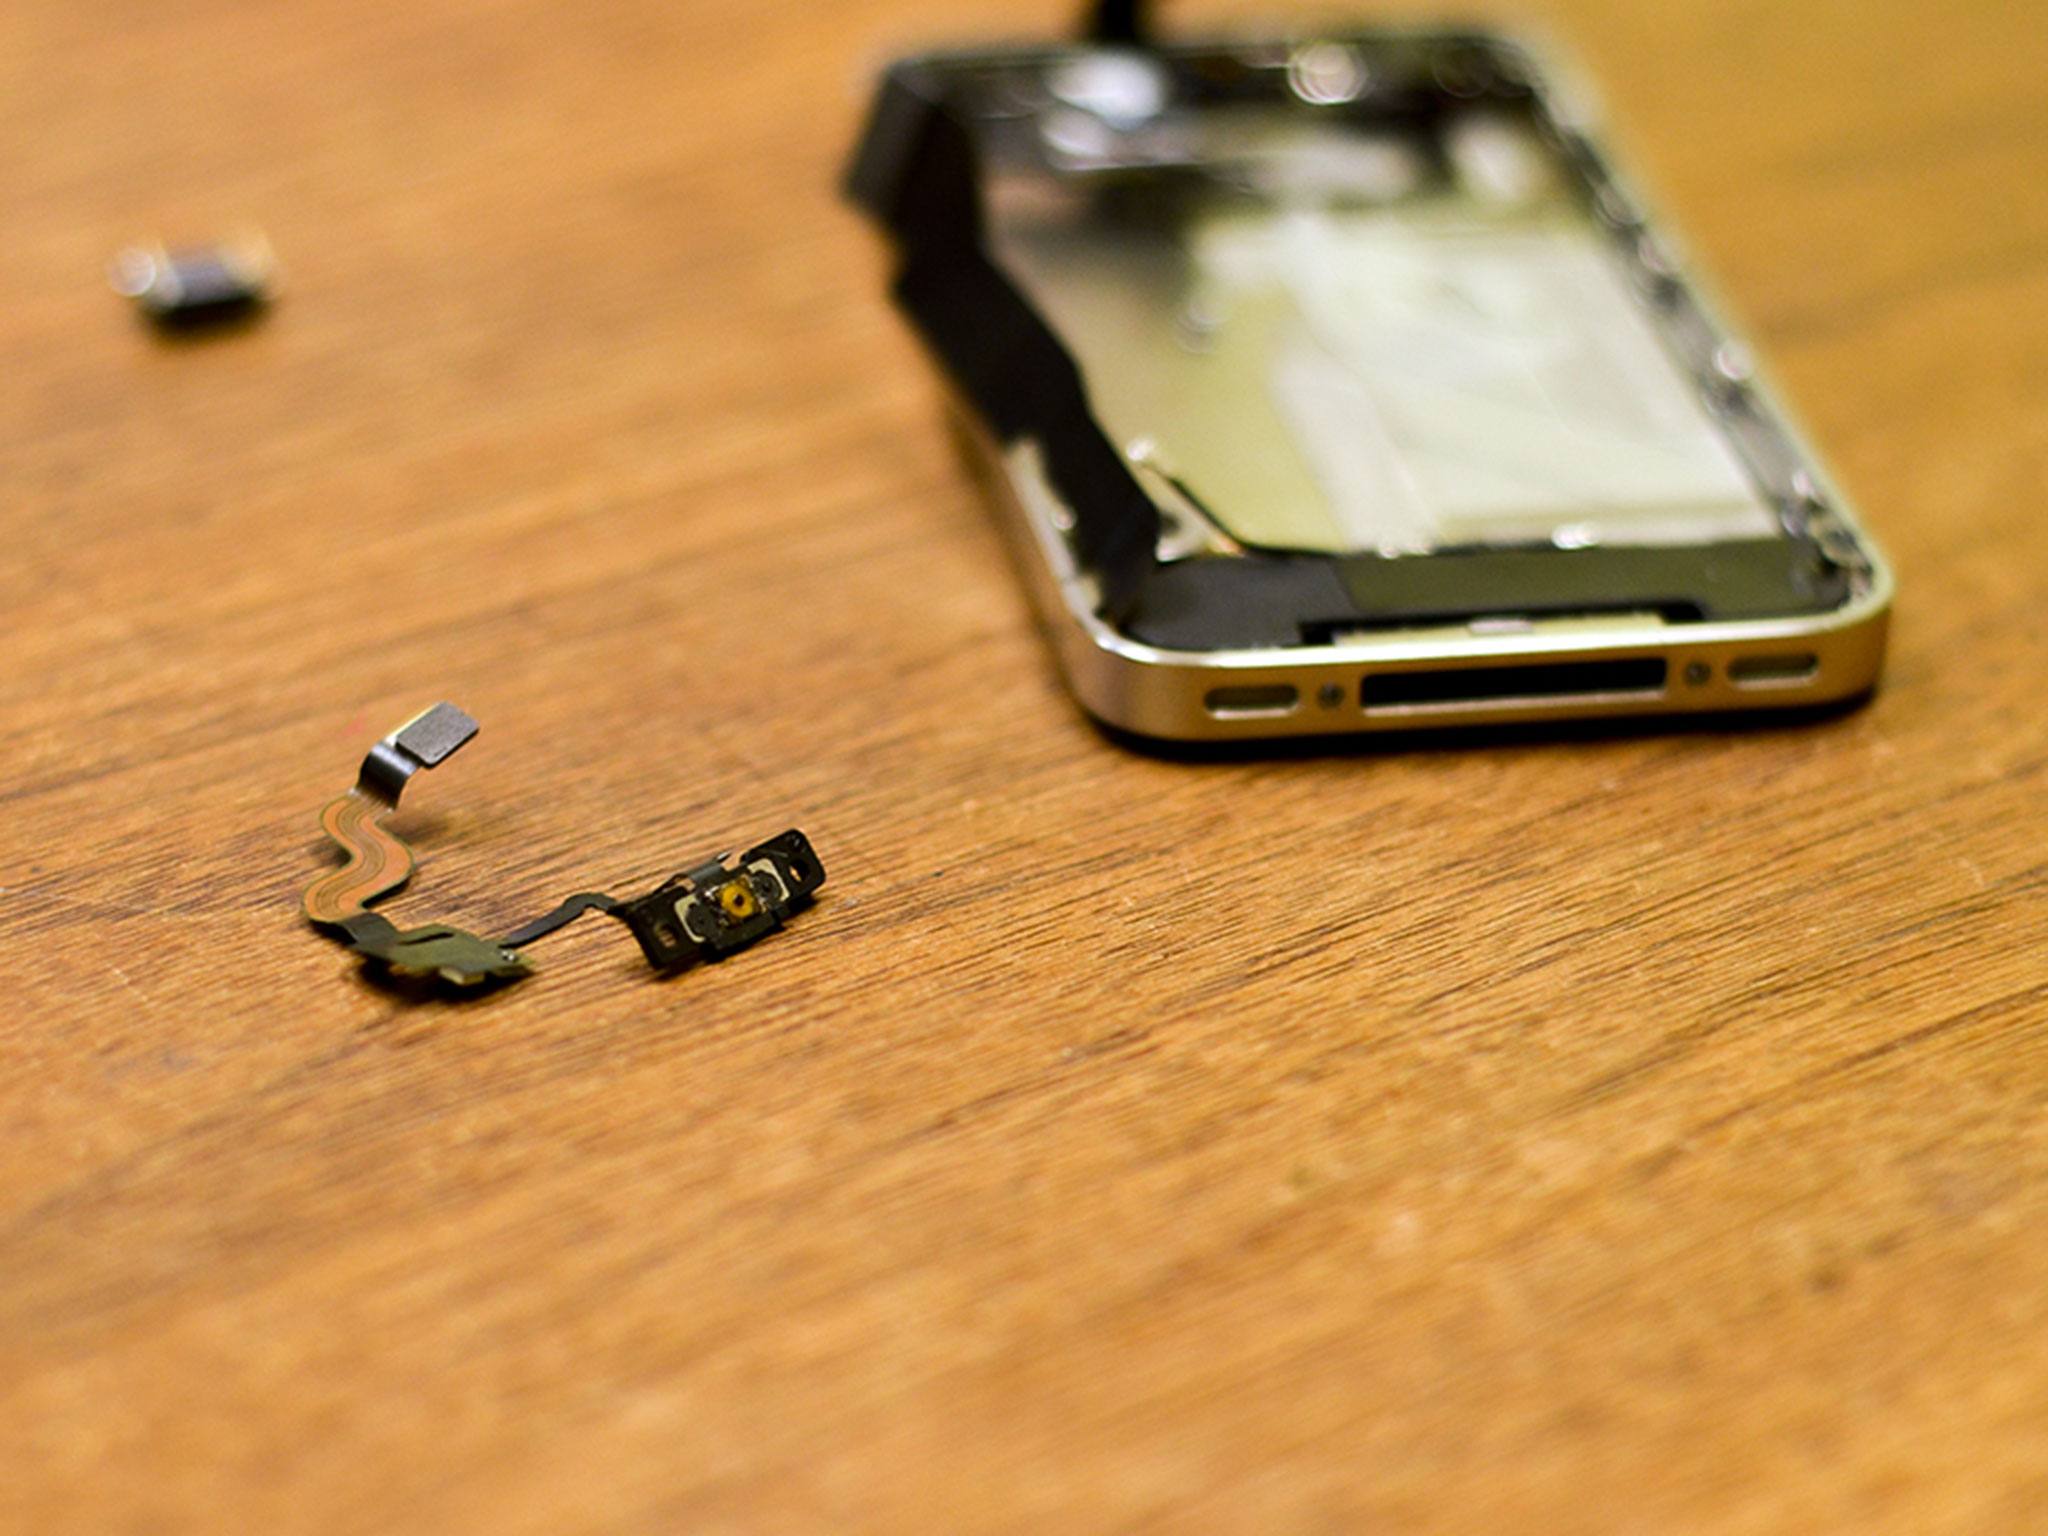 How to replace a Verizon or Sprint iPhone 4 stuck power button